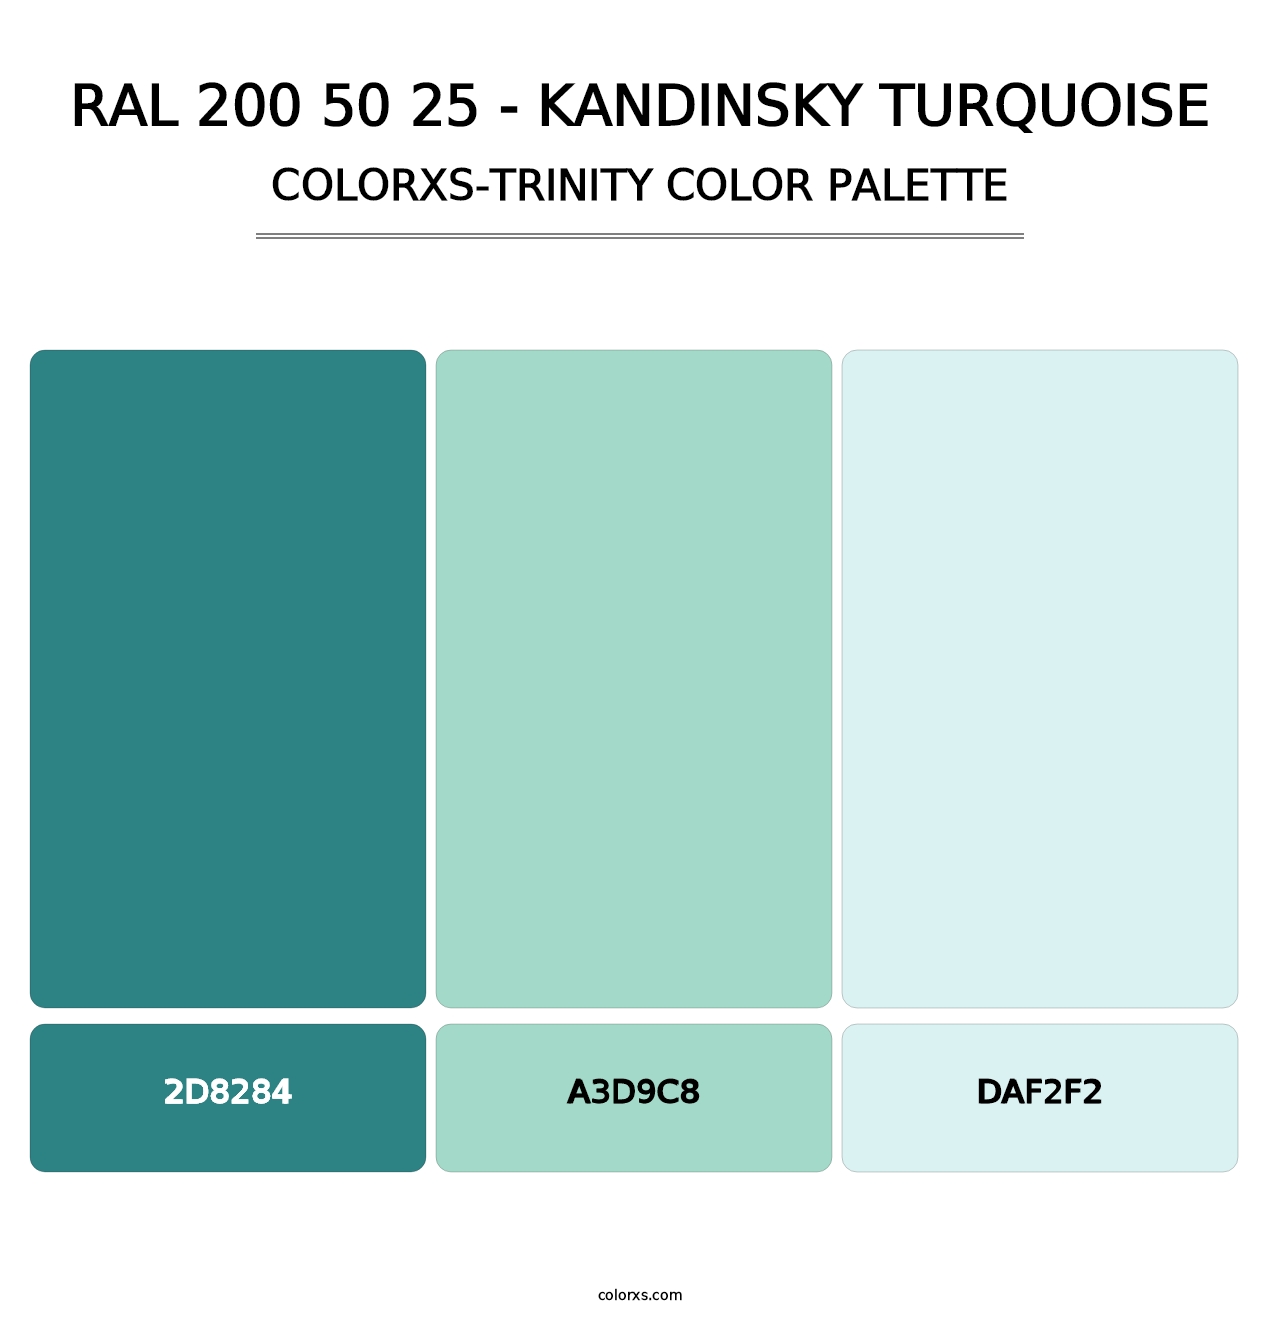 RAL 200 50 25 - Kandinsky Turquoise - Colorxs Trinity Palette